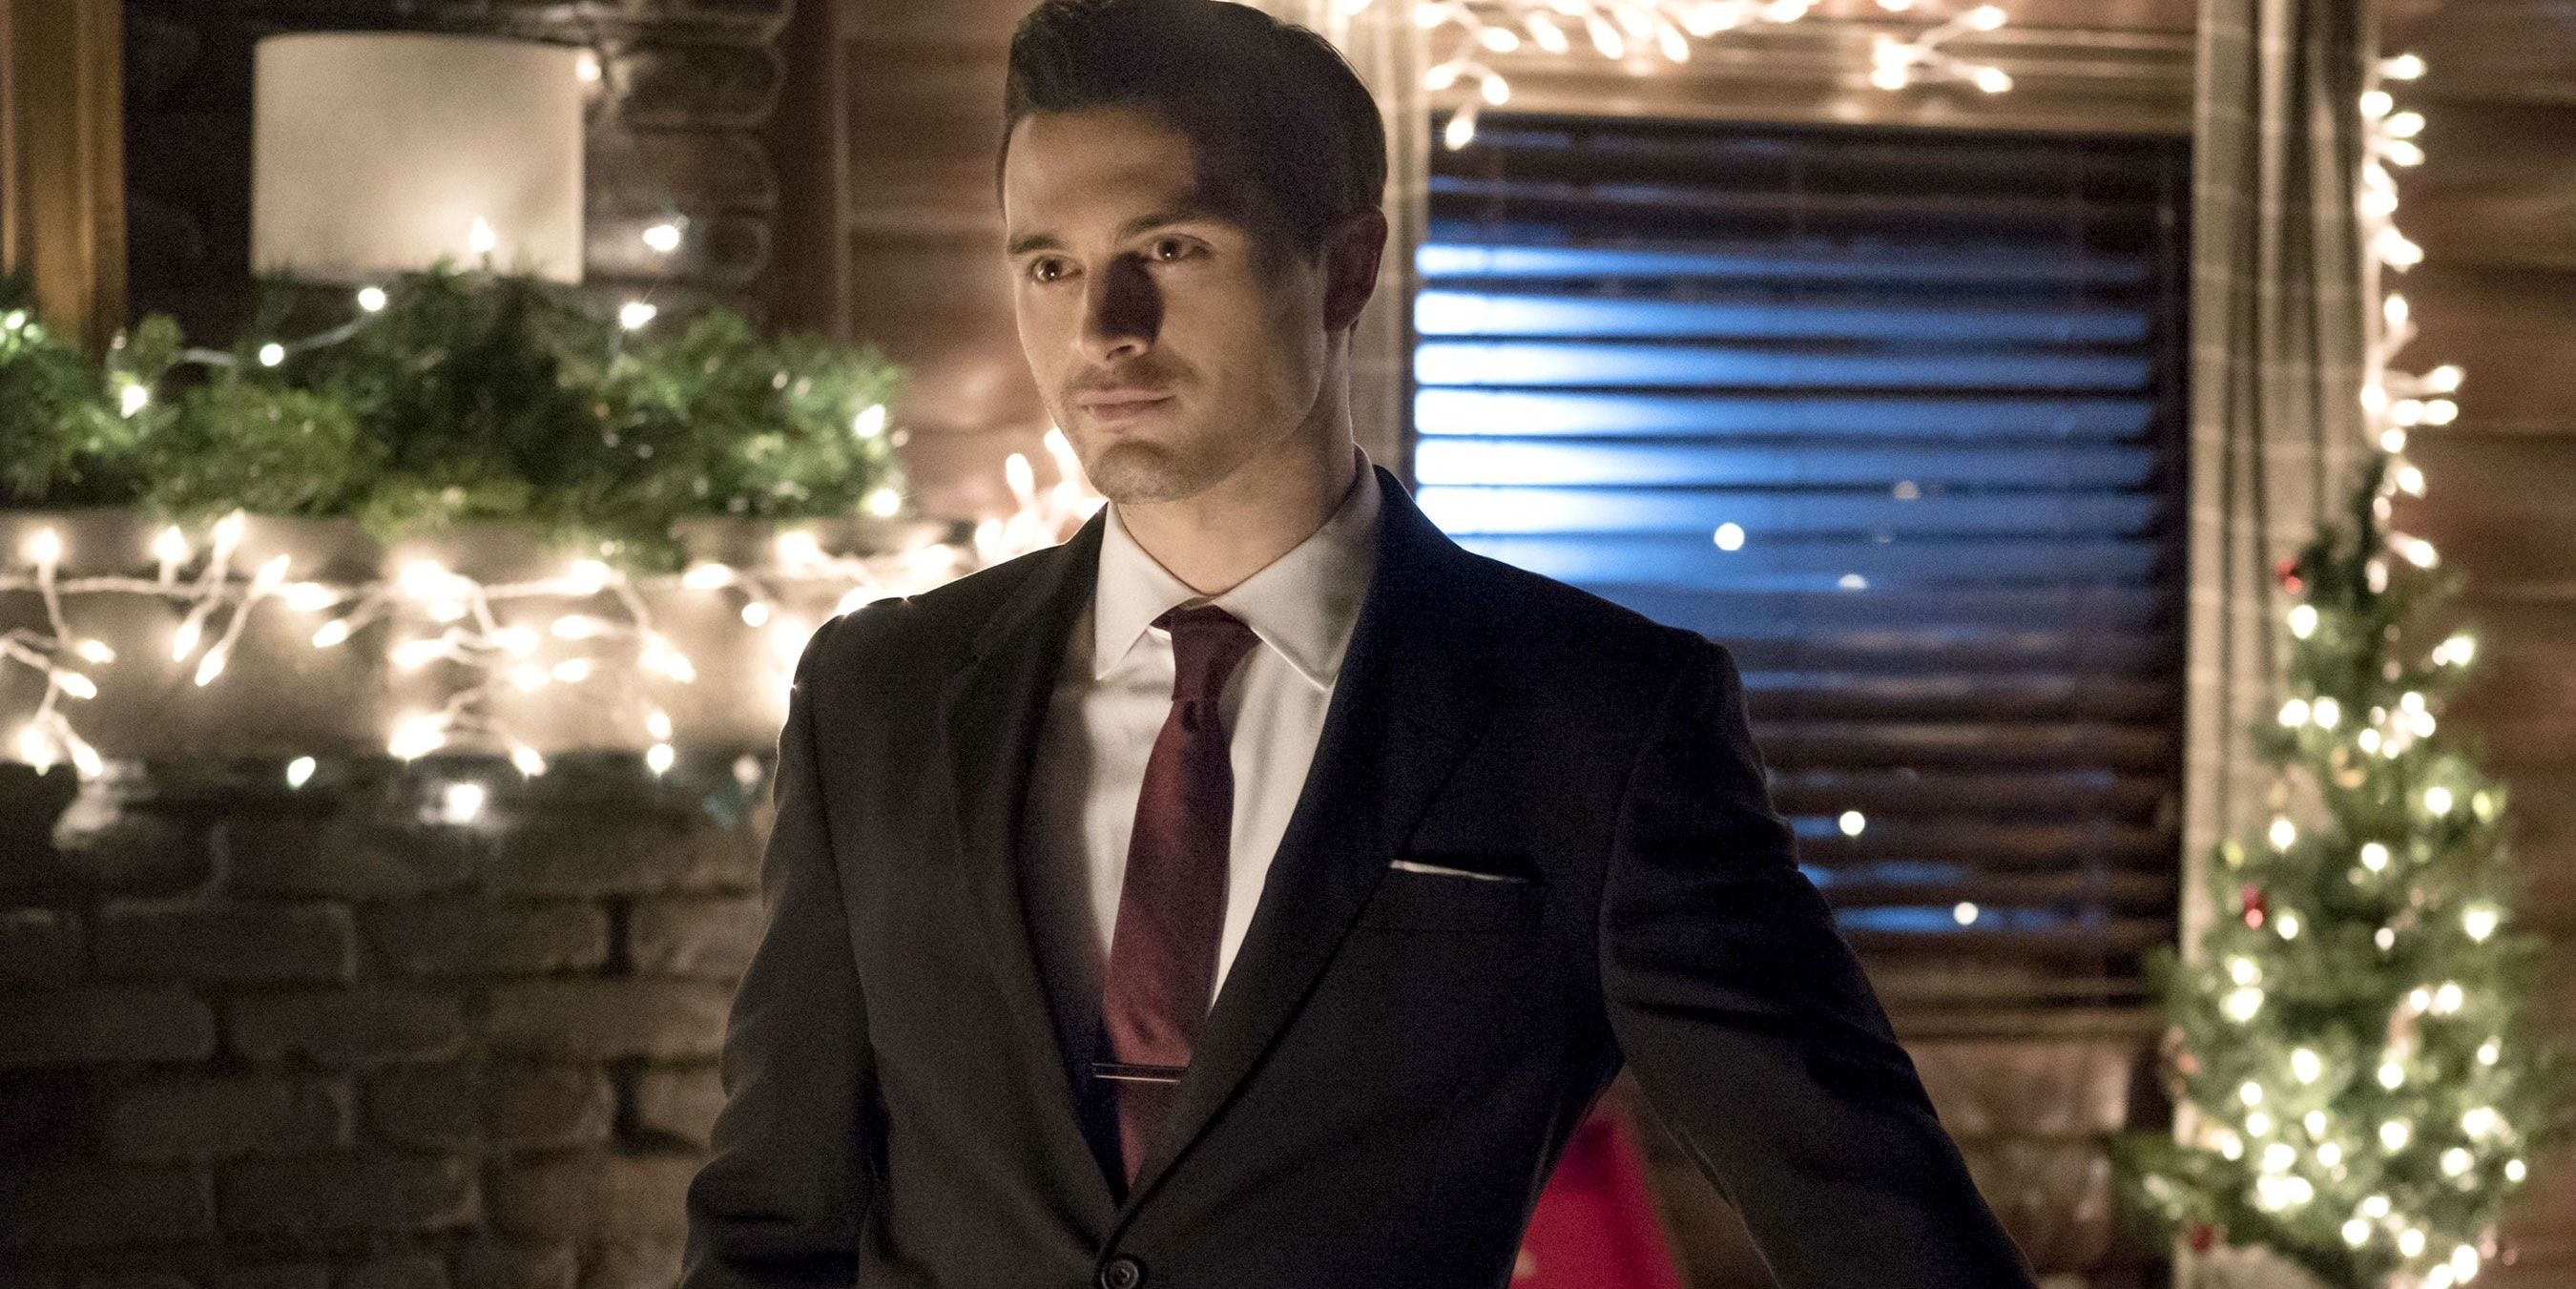 Enzo standing in a tuxedo in The Vampire Diaries